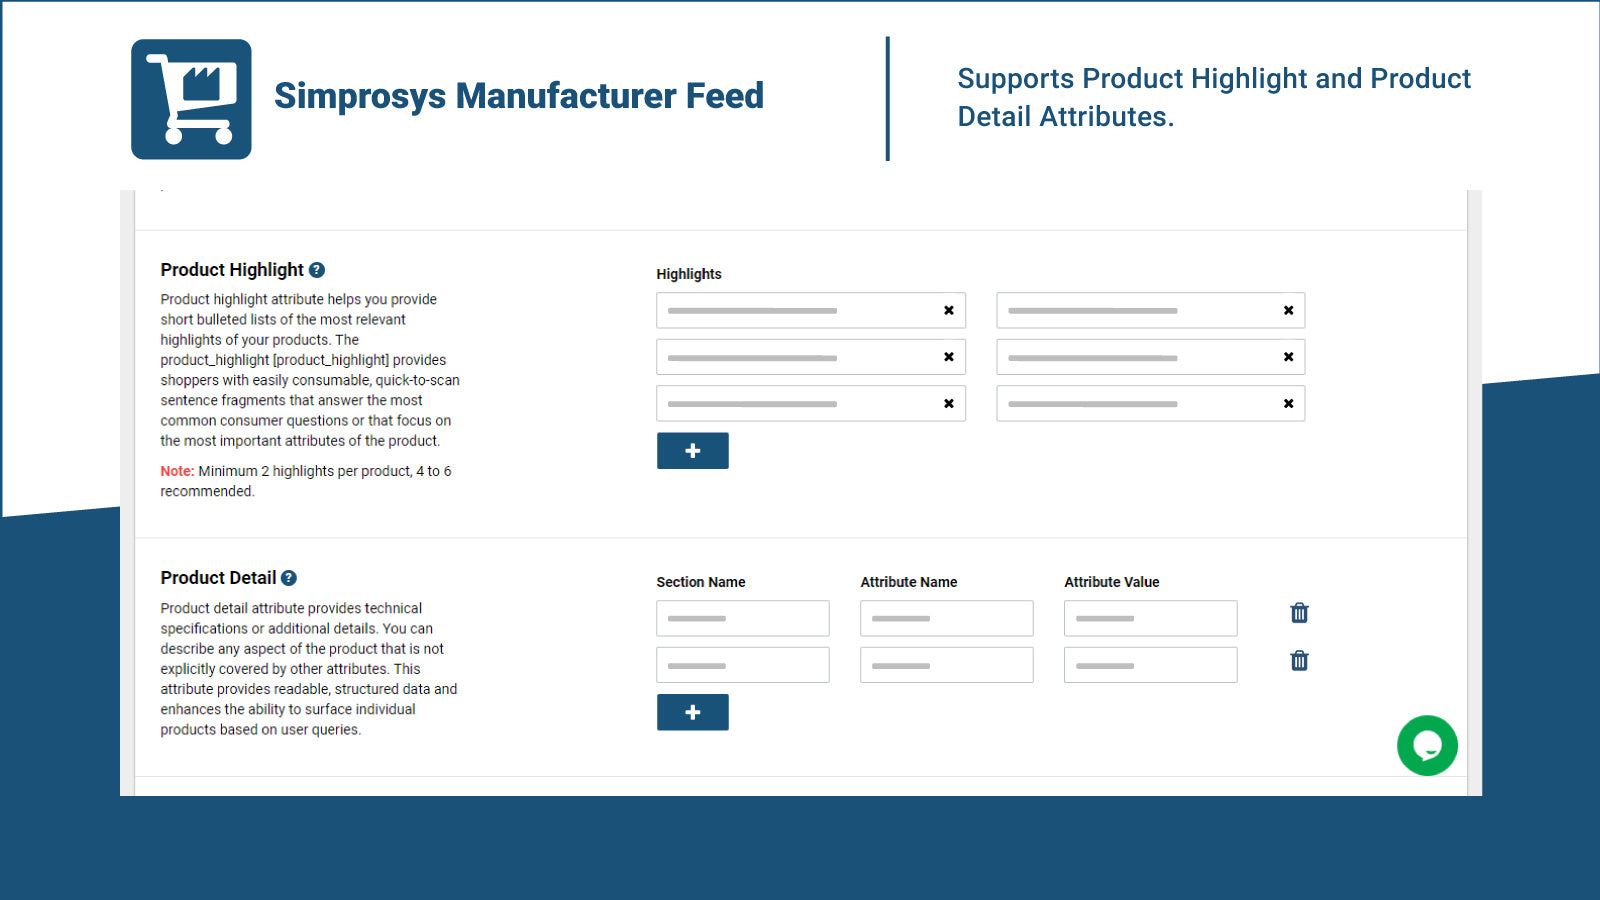 Supports Product Highlight and Product Detail Attributes